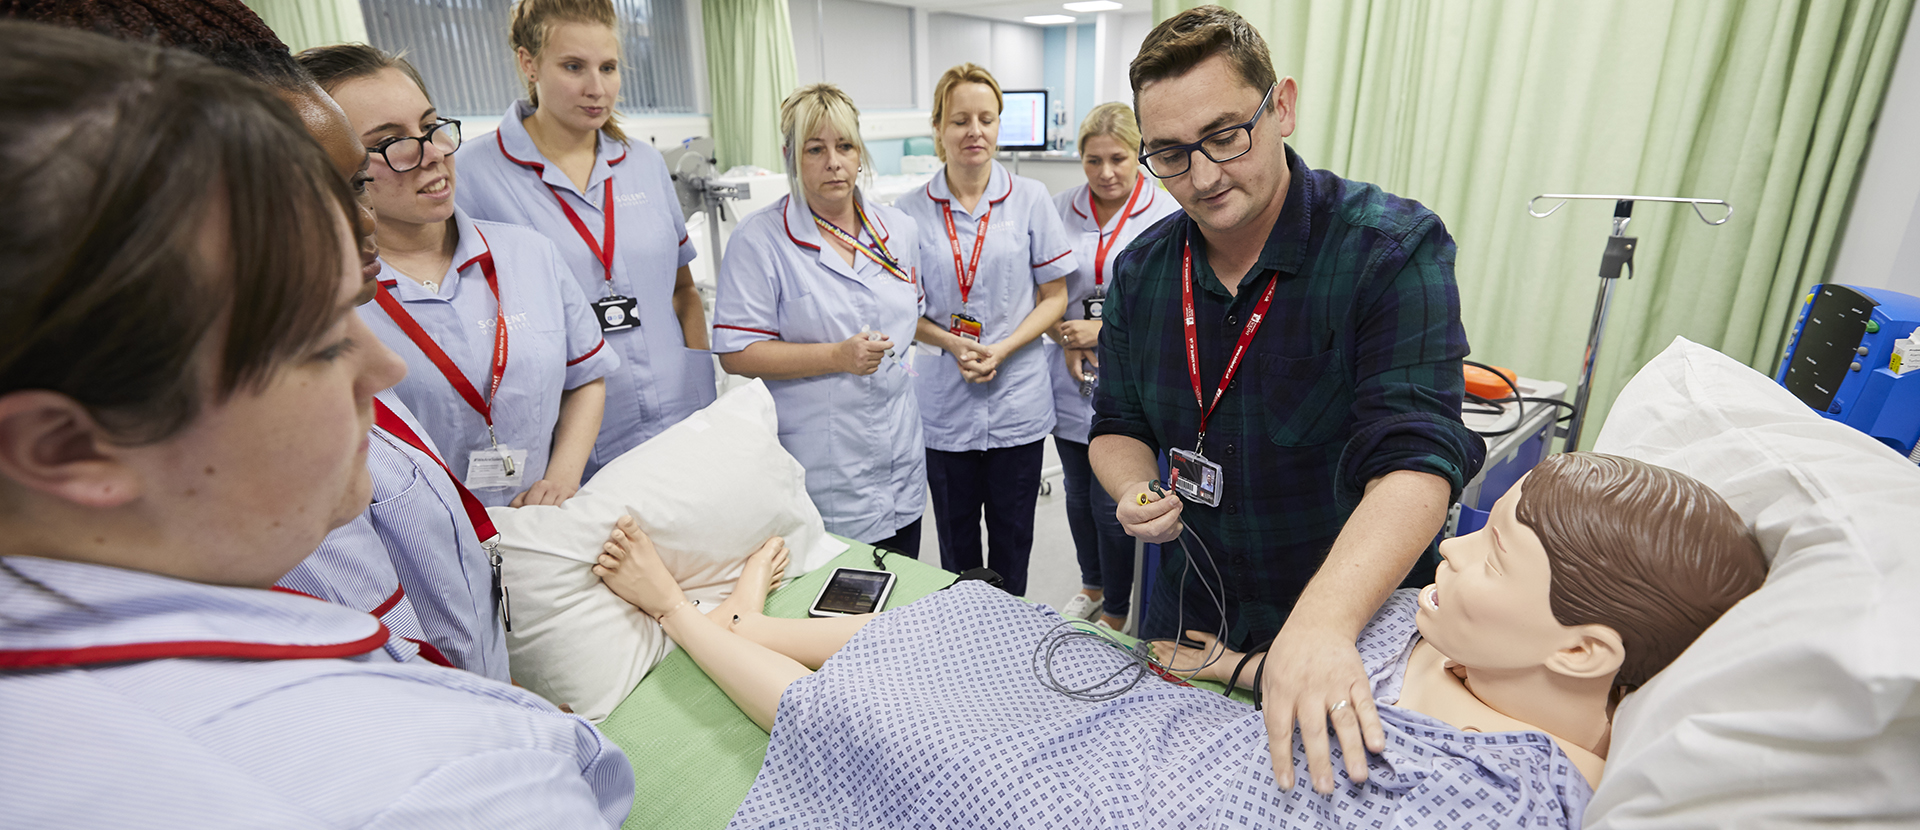 Nursing students examining a patient with their lecturer